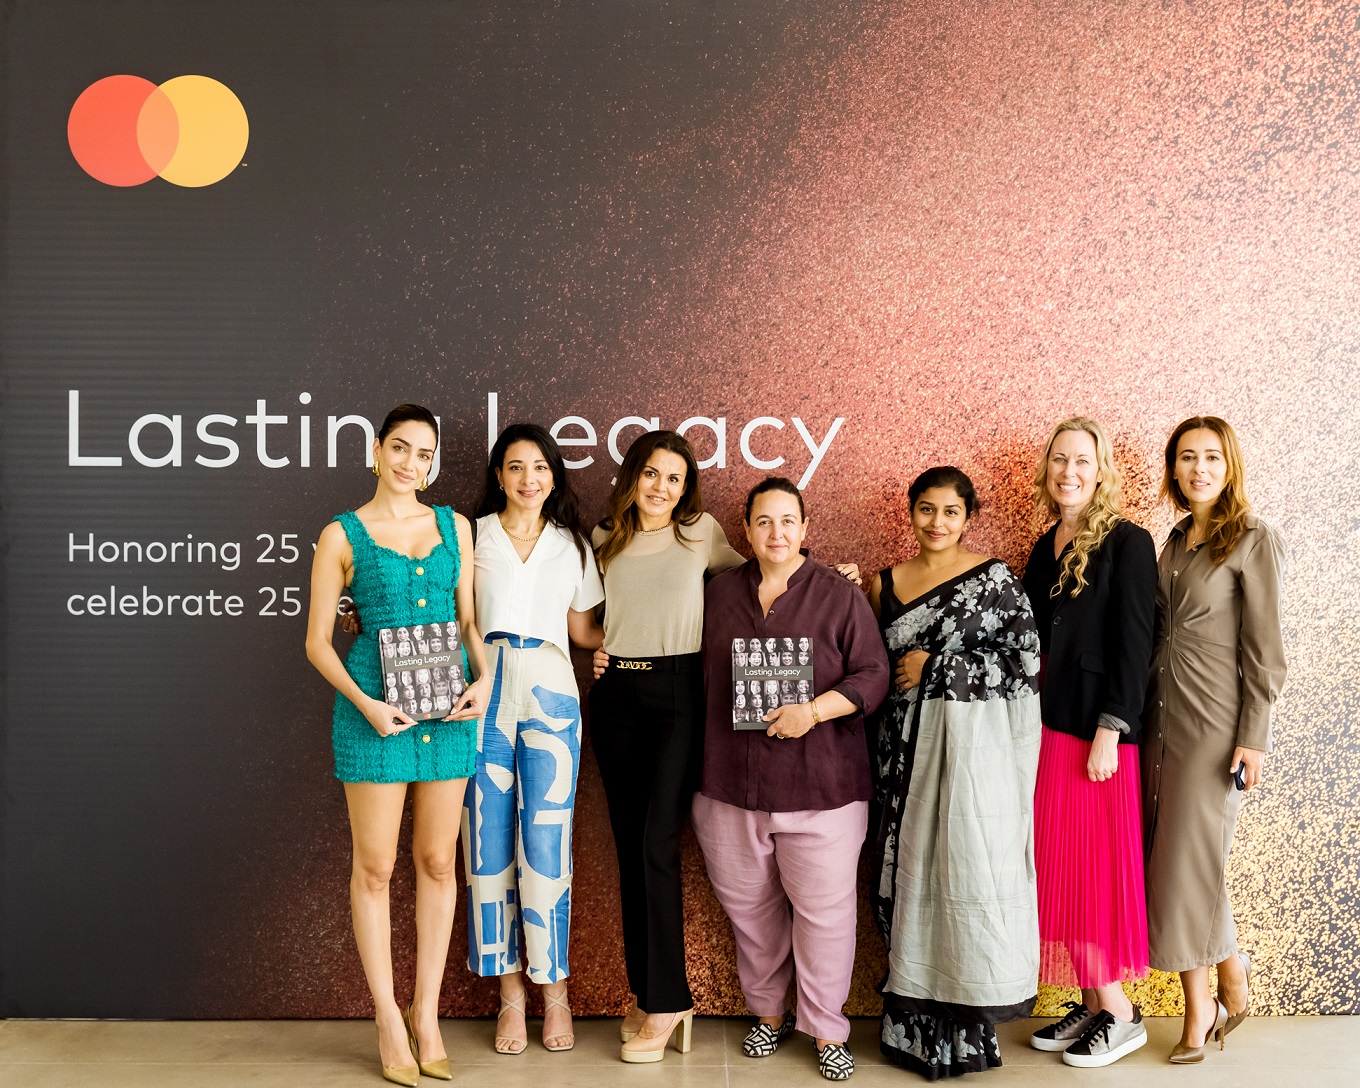 Image for Mastercard Launches Legacy Book Celebrating 25 Inspiring Women And Their Trailblazing Stories